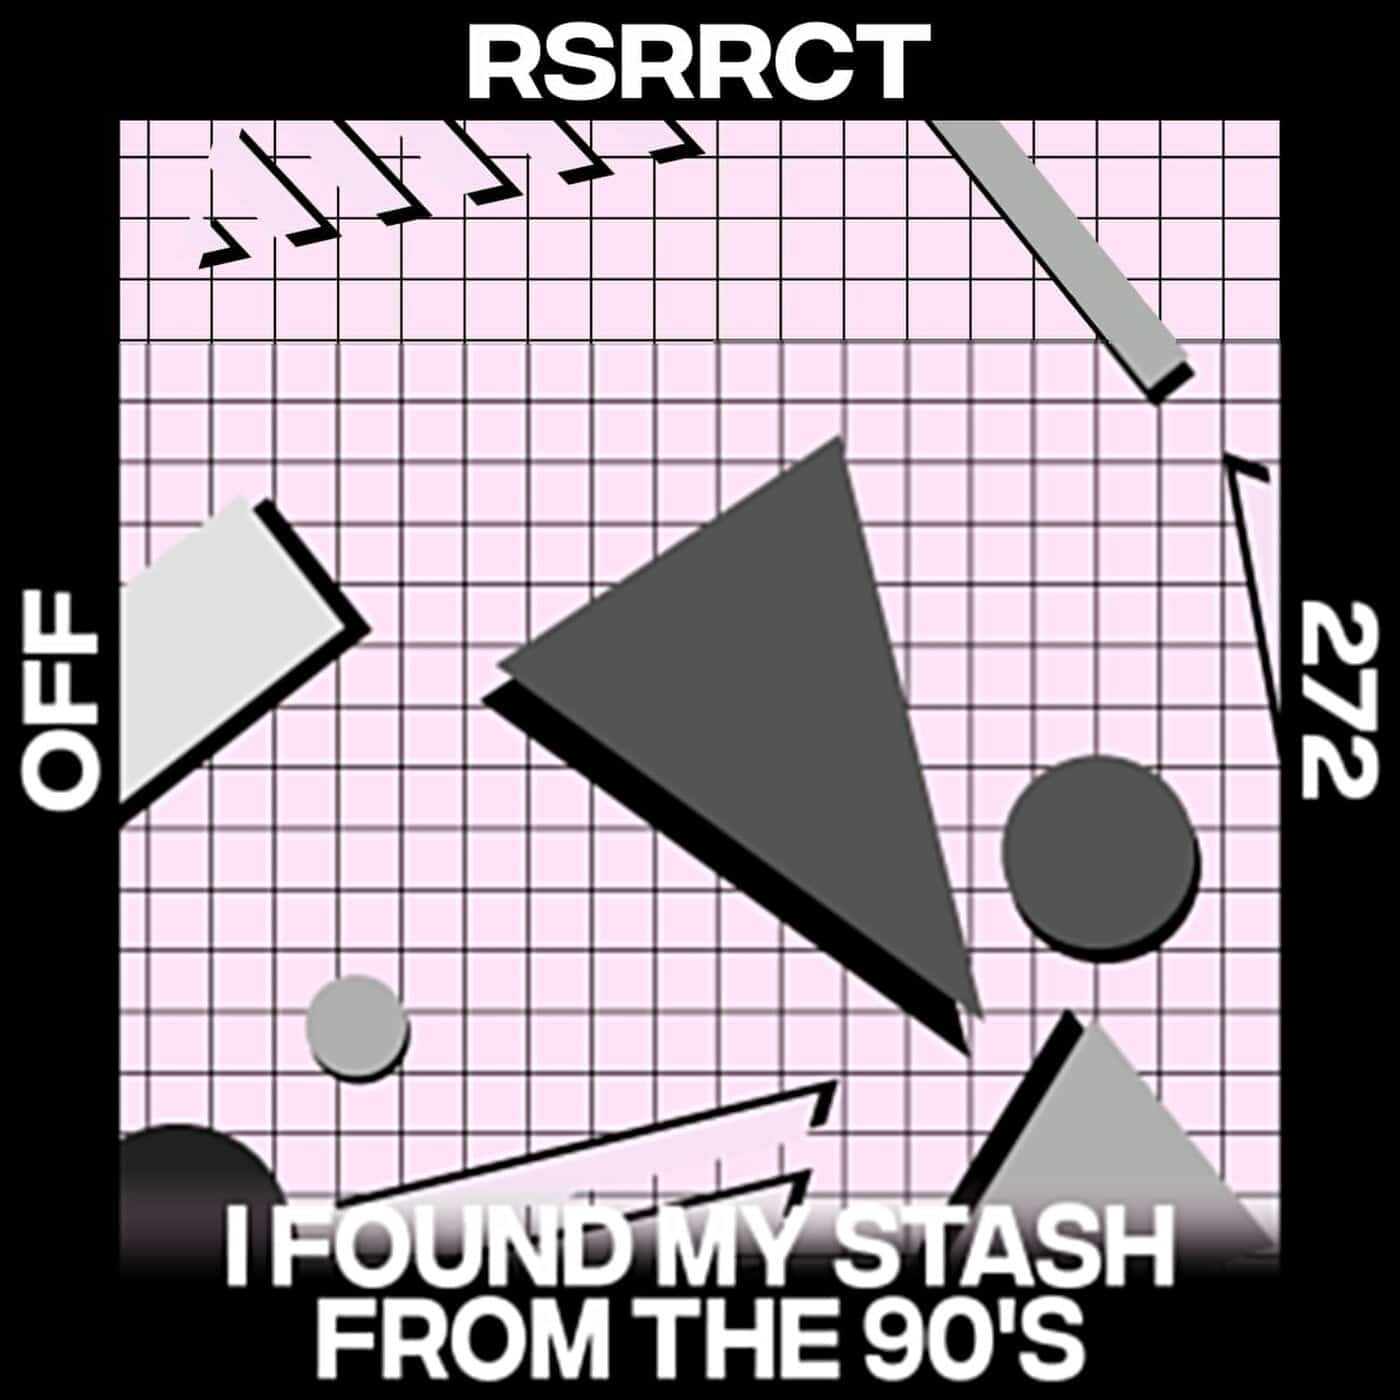 Download RSRRCT - I Found My Stash From The 90's on Electrobuzz